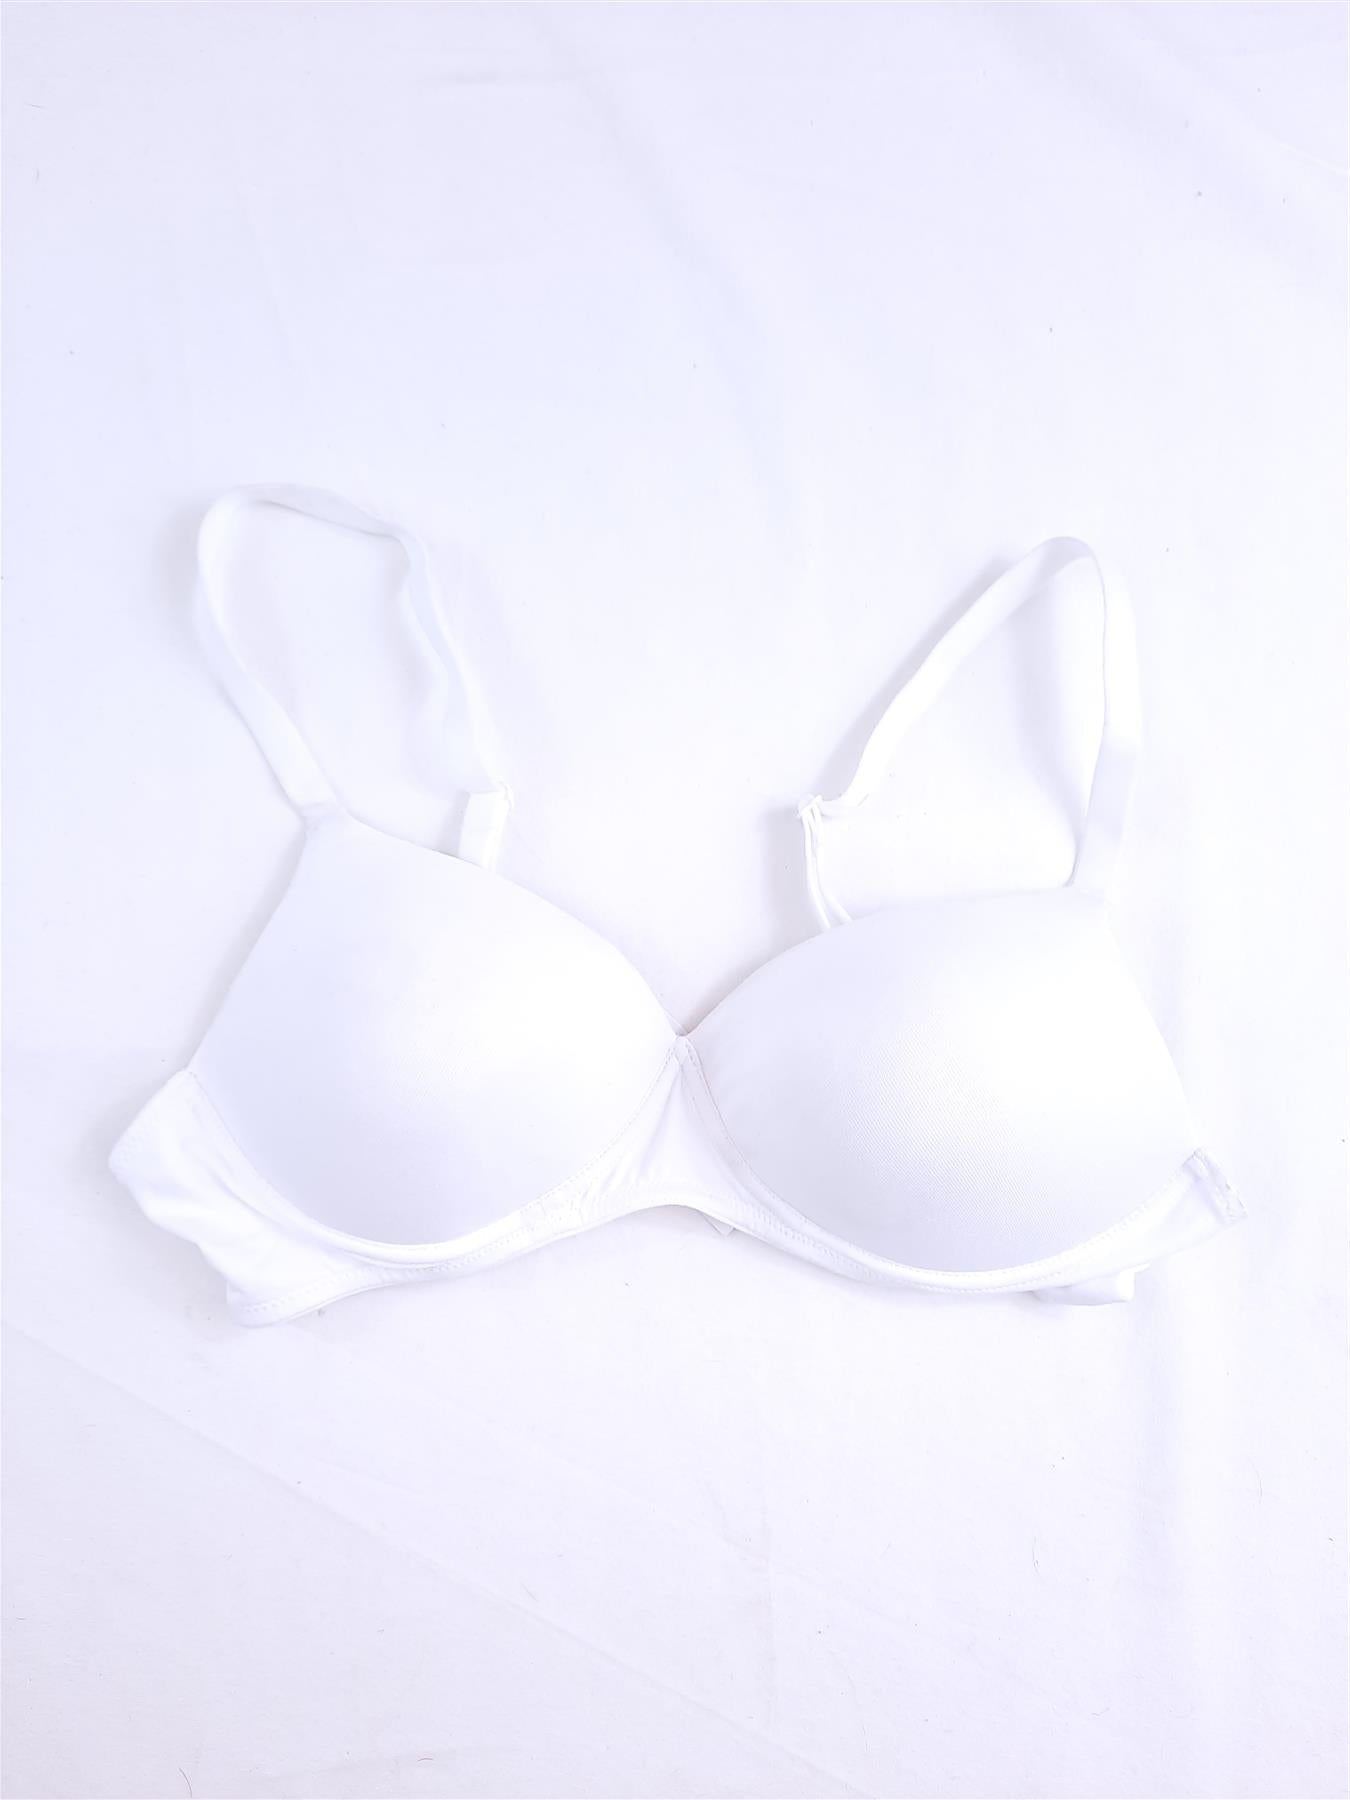 M S Super Soft Non-Wired Bra Cotton Rich Lightly-Padded Shop Soiled Brand New